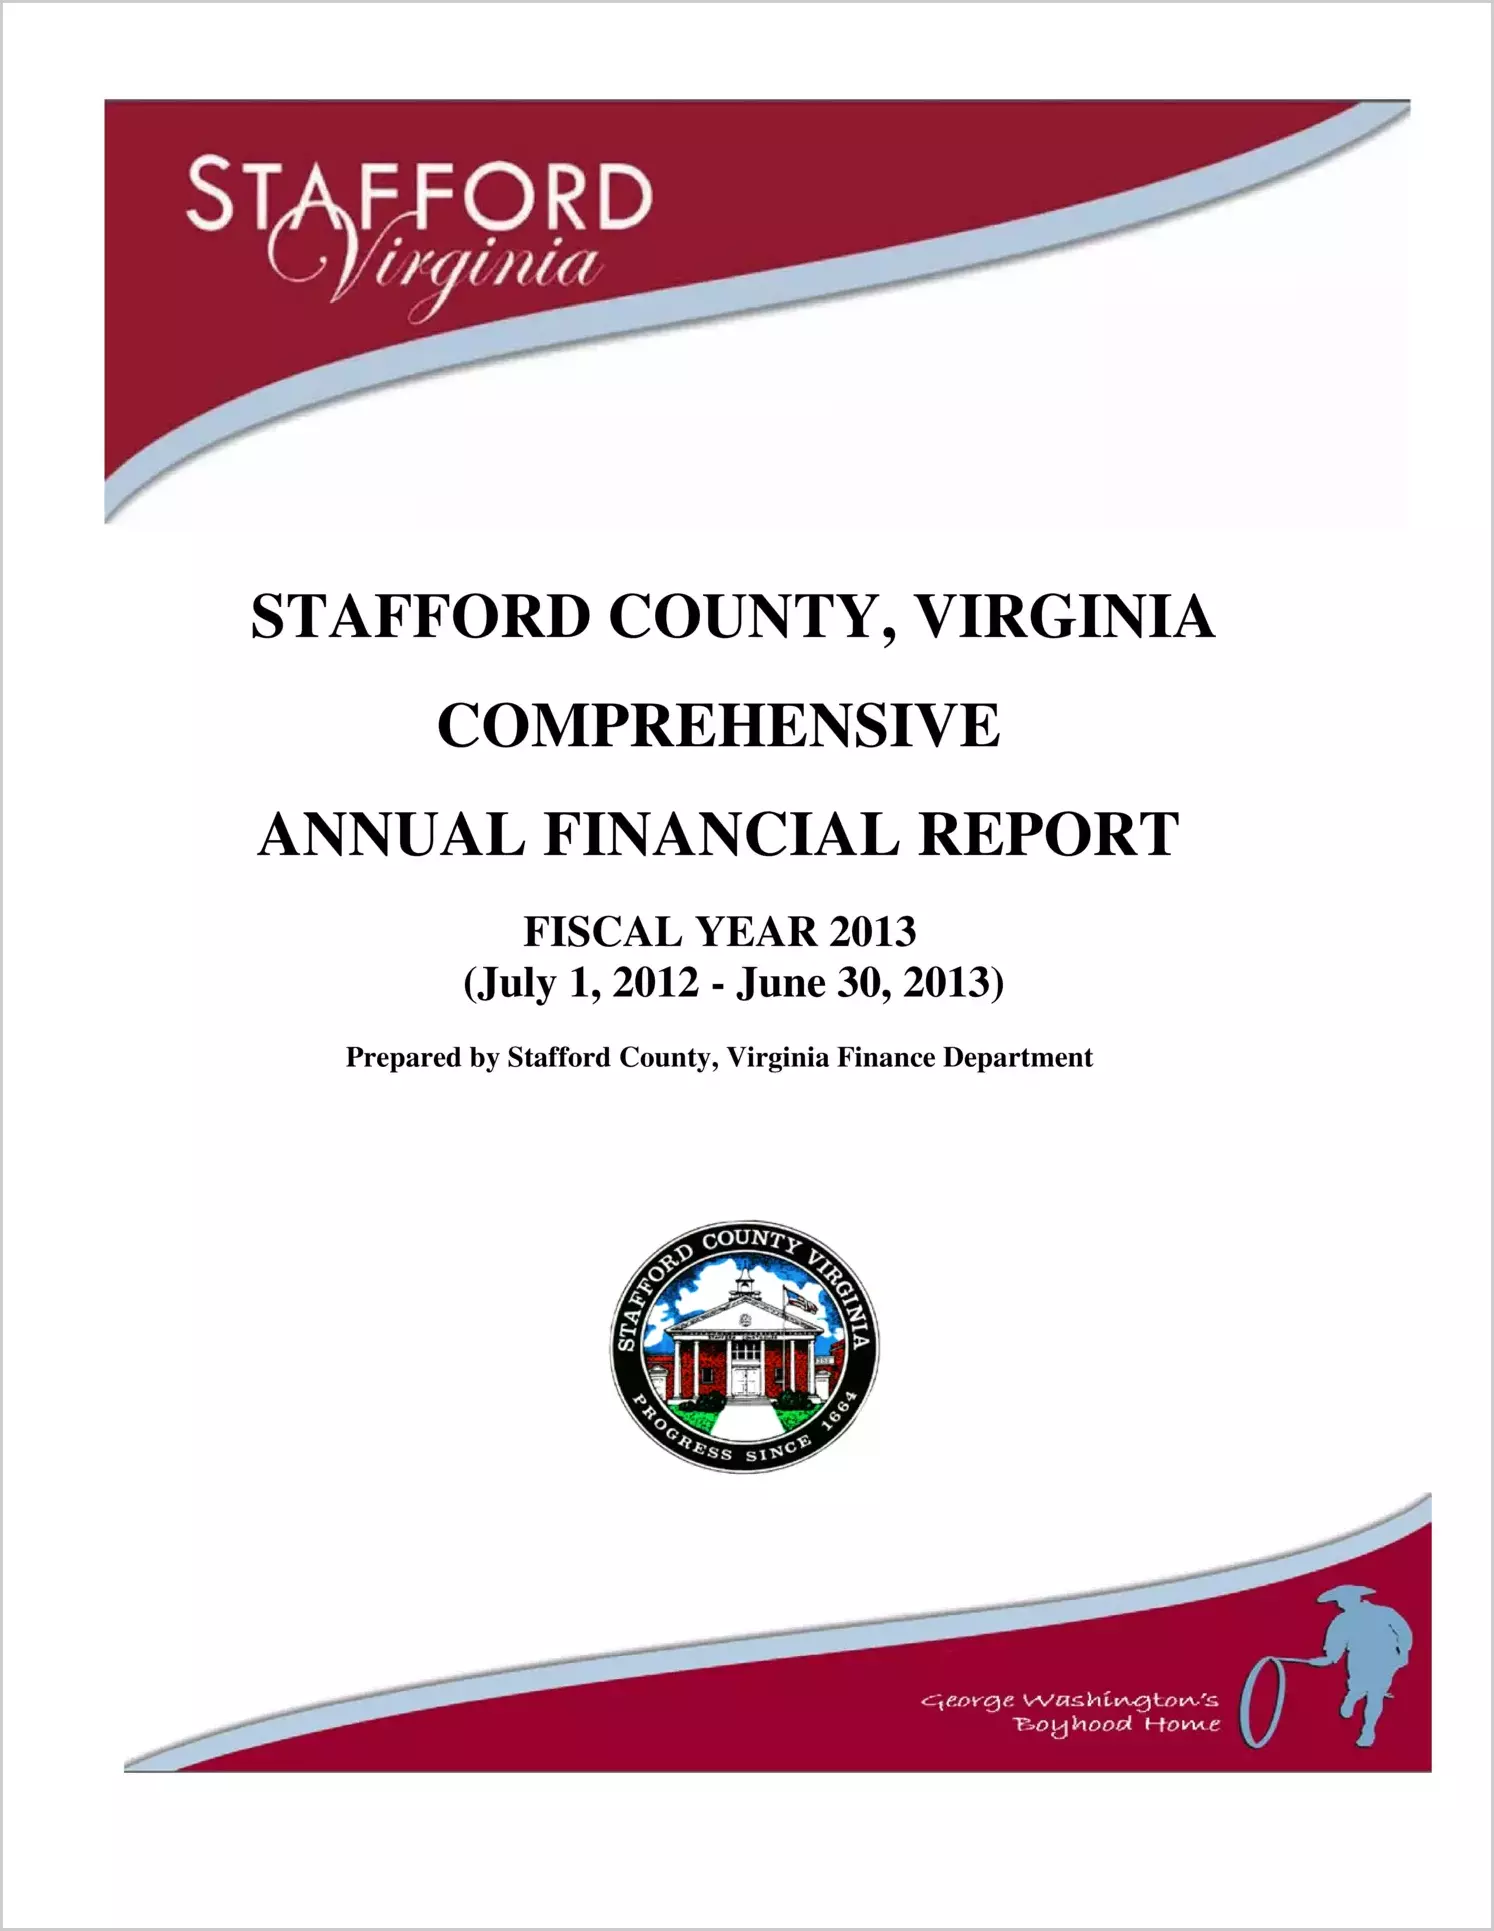 2013 Annual Financial Report for County of Stafford